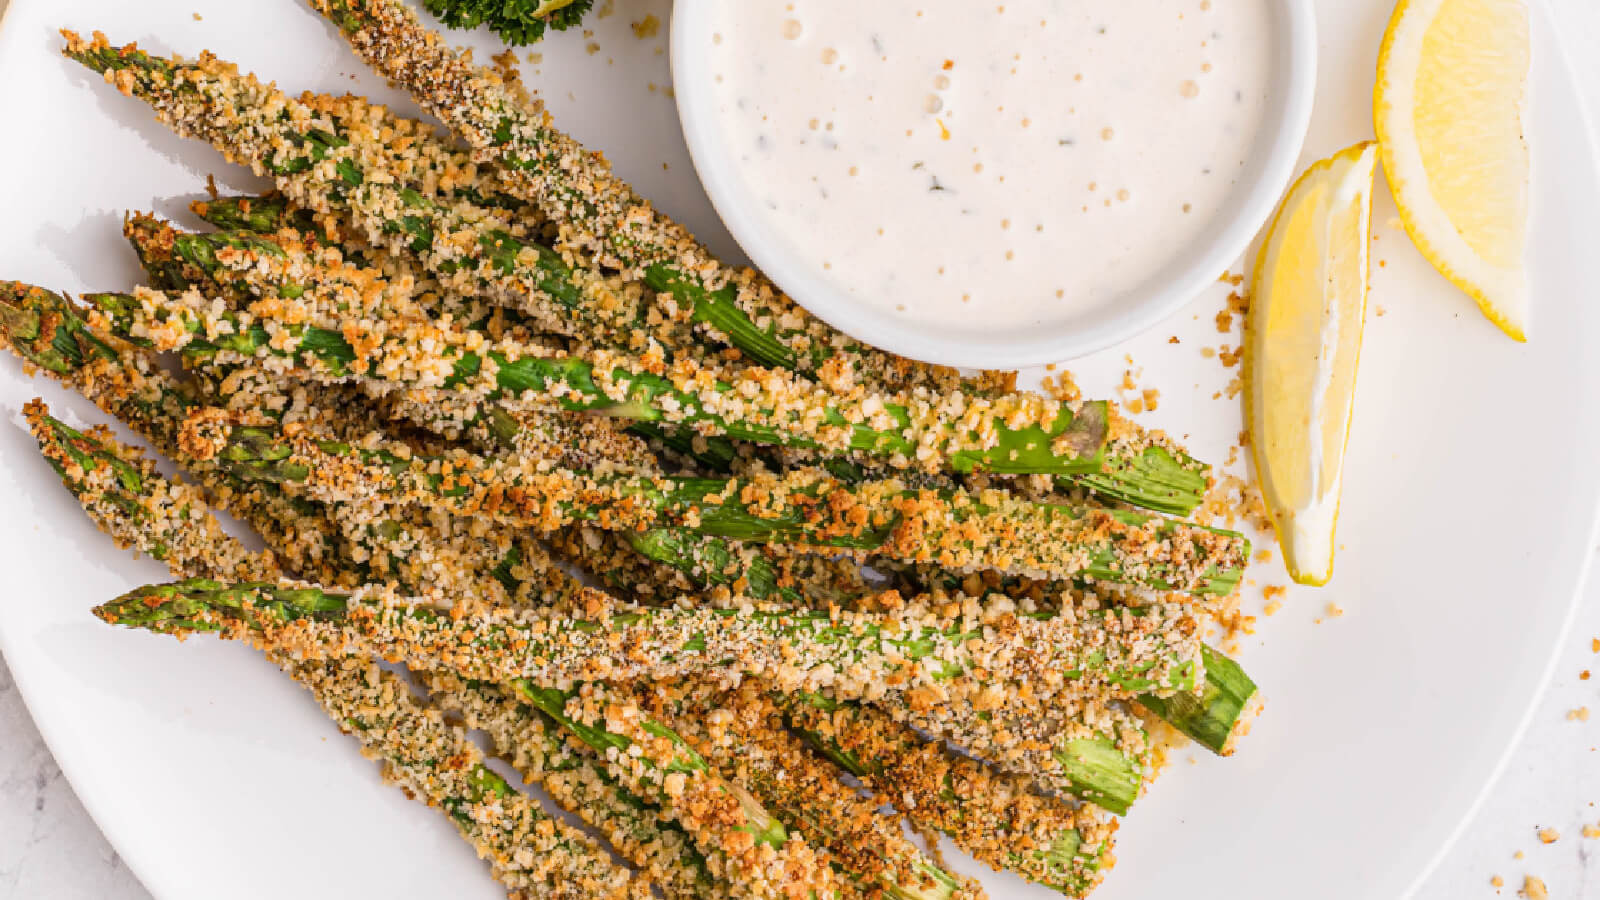 Air fryer asparagus fries on a white plate with a small bowl or dressing to dip them in.